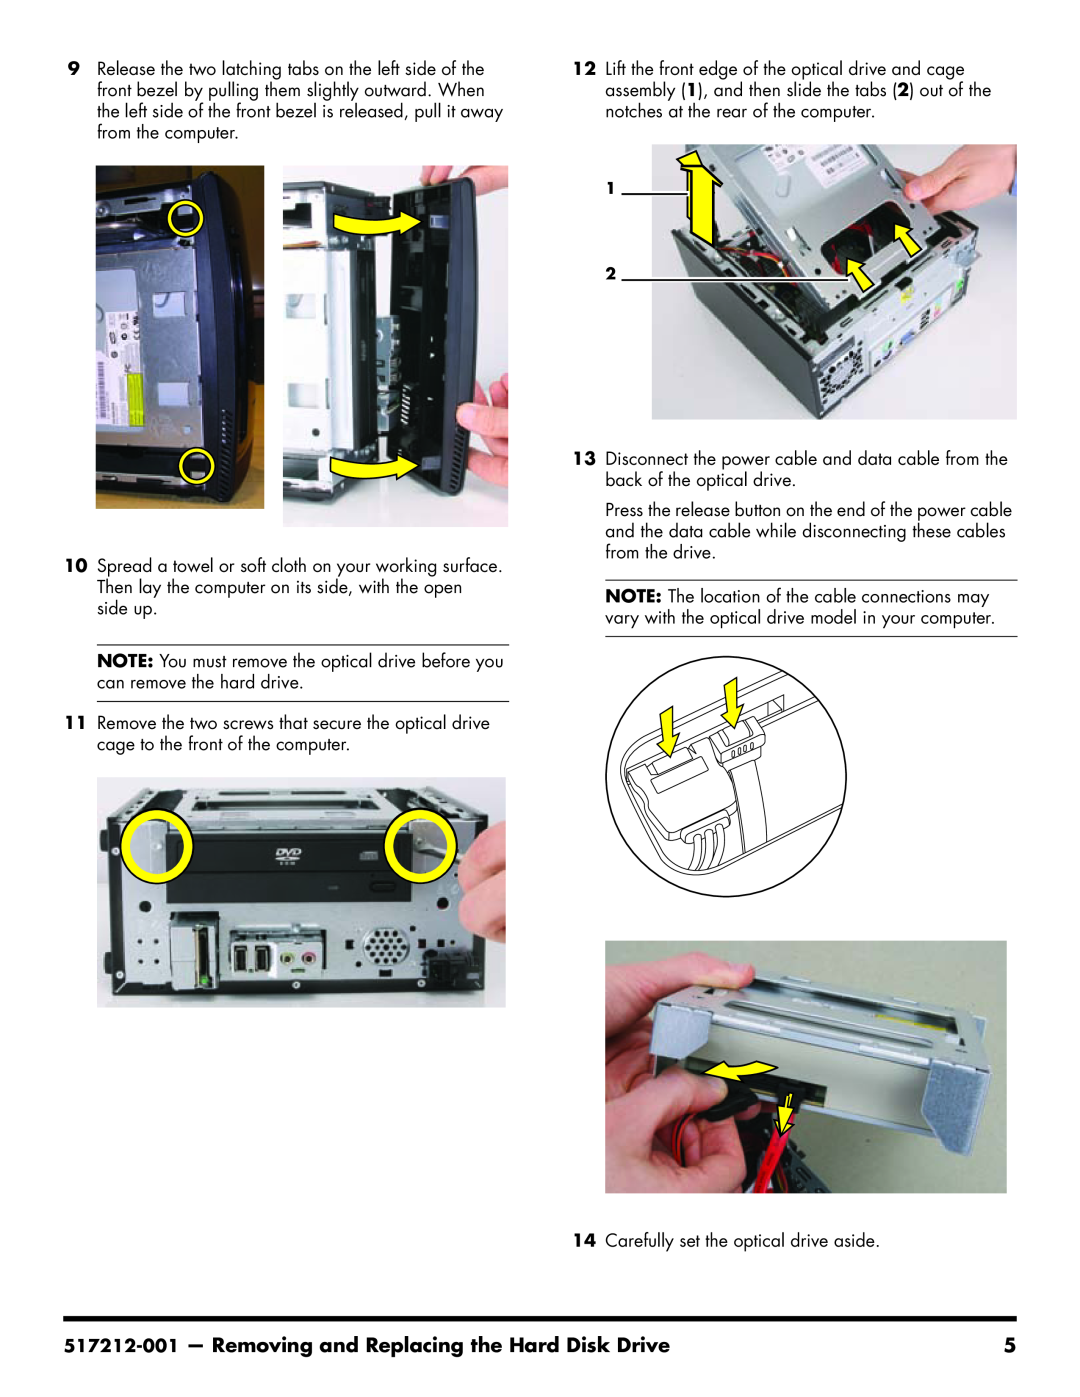 Compaq 517212-001 manual Removing and Replacing the Hard Disk Drive, Carefully set the optical drive aside 